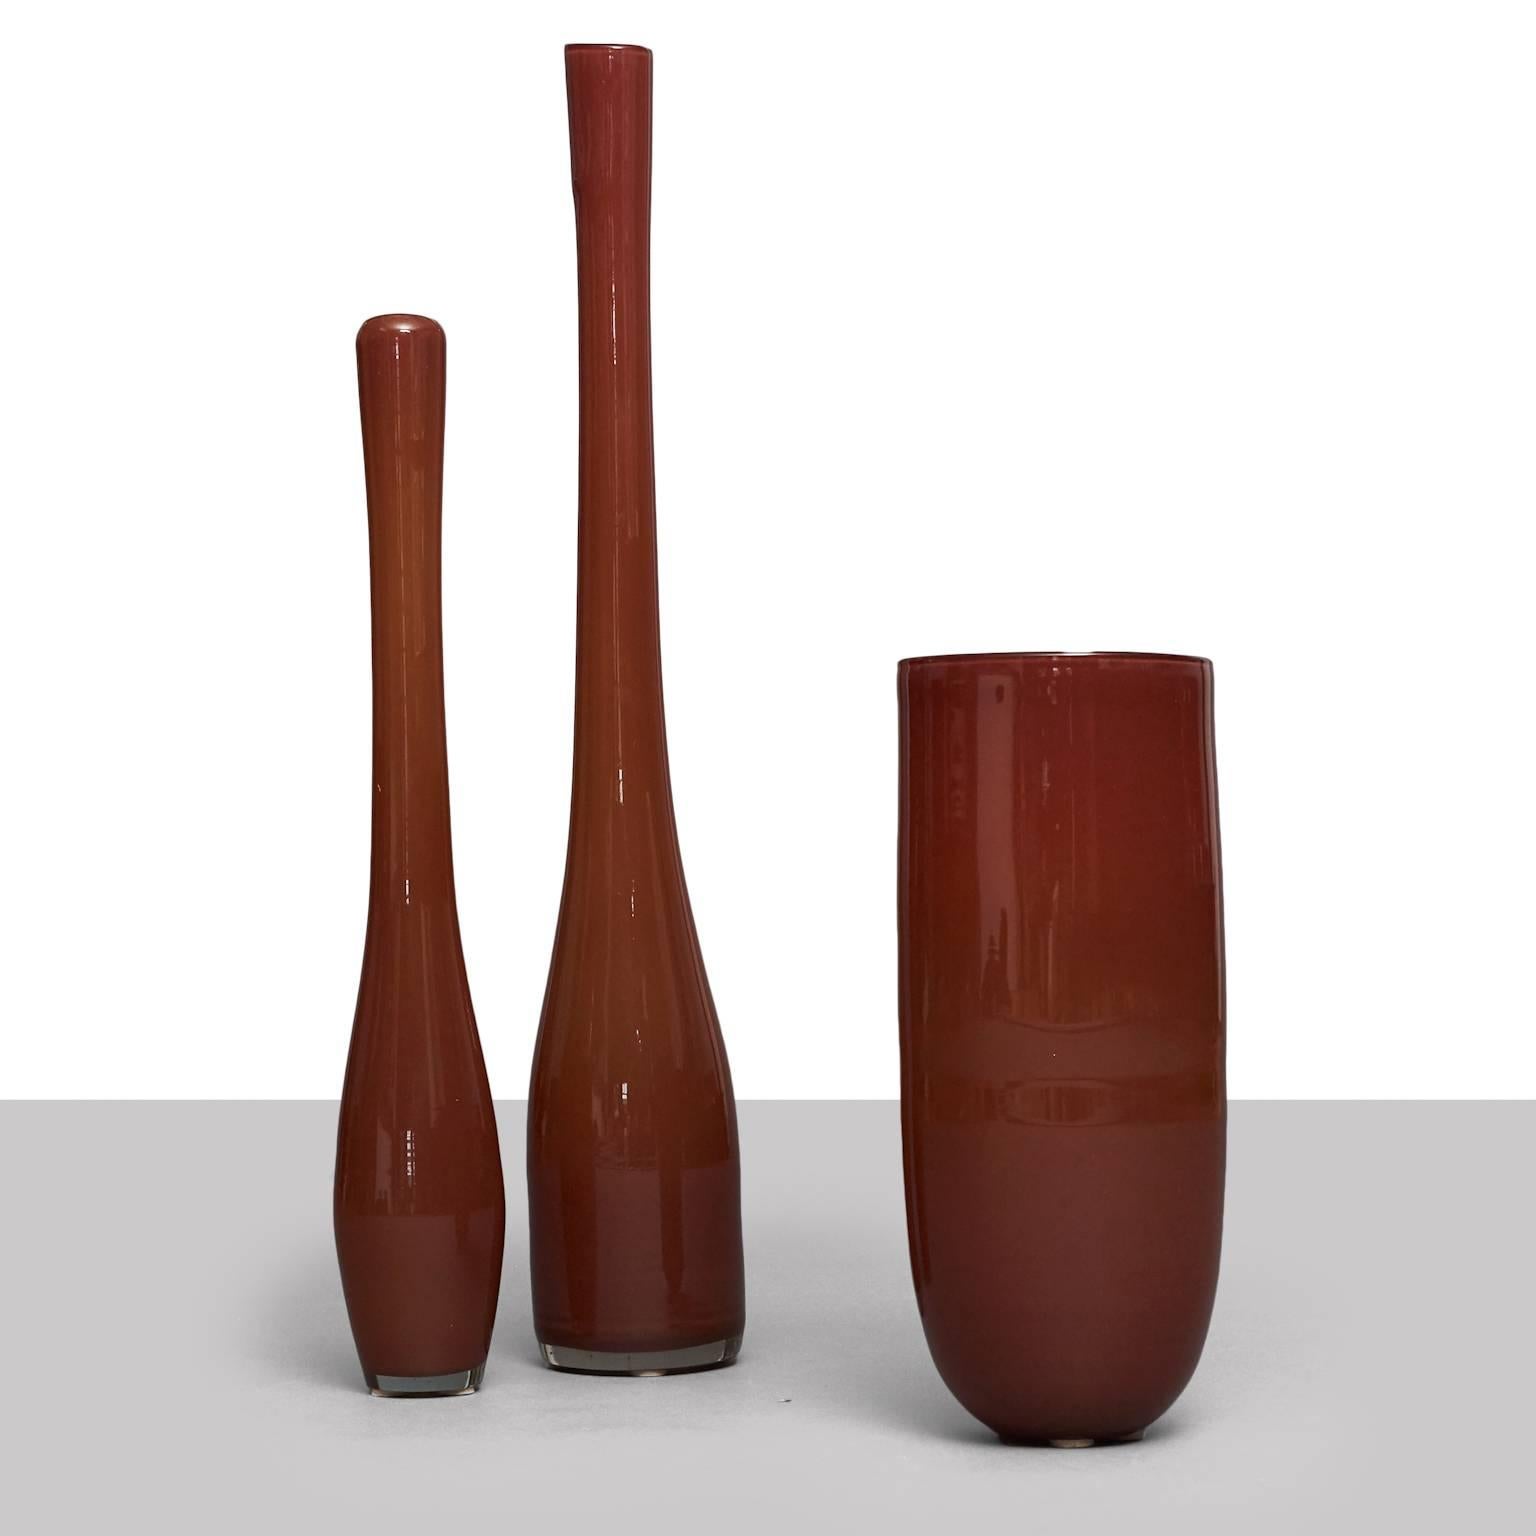 Three unique, handblown floor vases. The highest vase is about 36 inches high, which is nearly the maximum length one can achieve with mouth-blown glass. Limited edition.